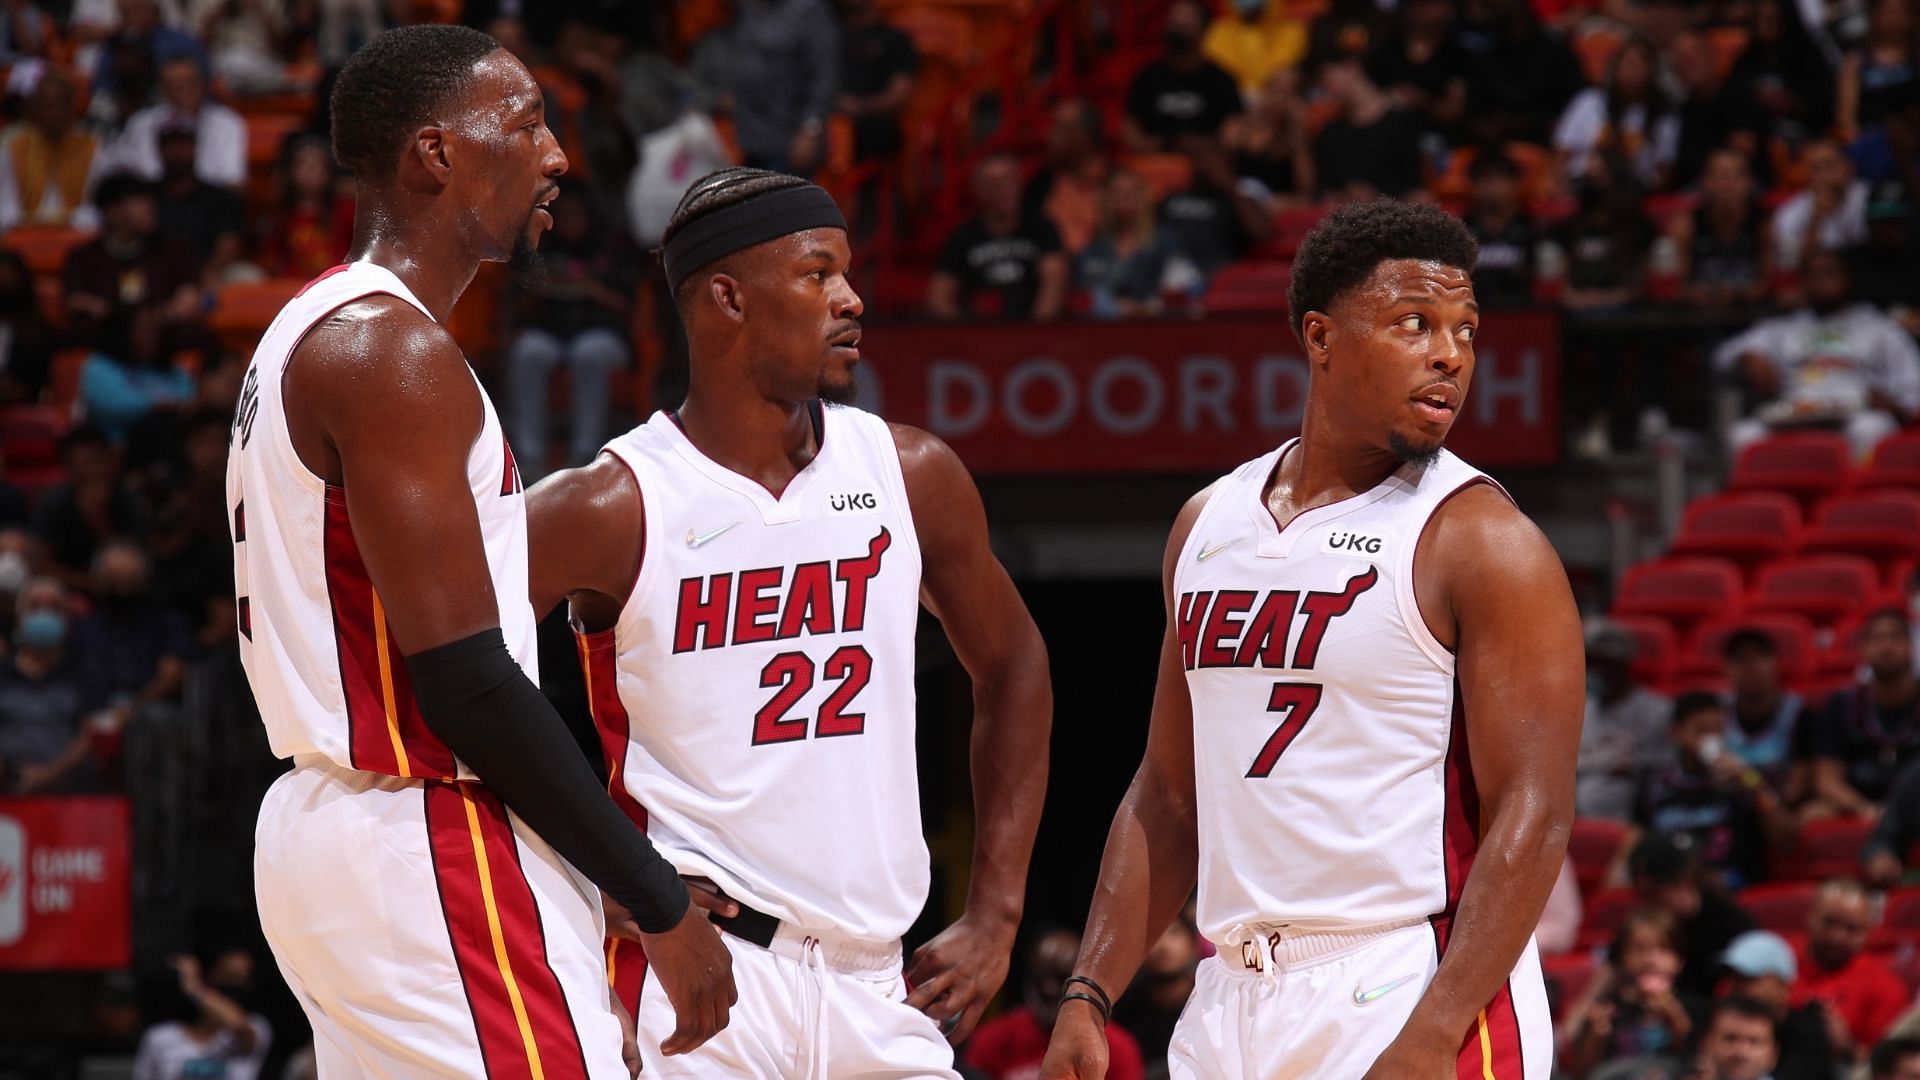 Miami&#039;s Big 3 was finally back in action in the Heat&#039;s win over the San Antonio Spurs [Photo: Sporting News]